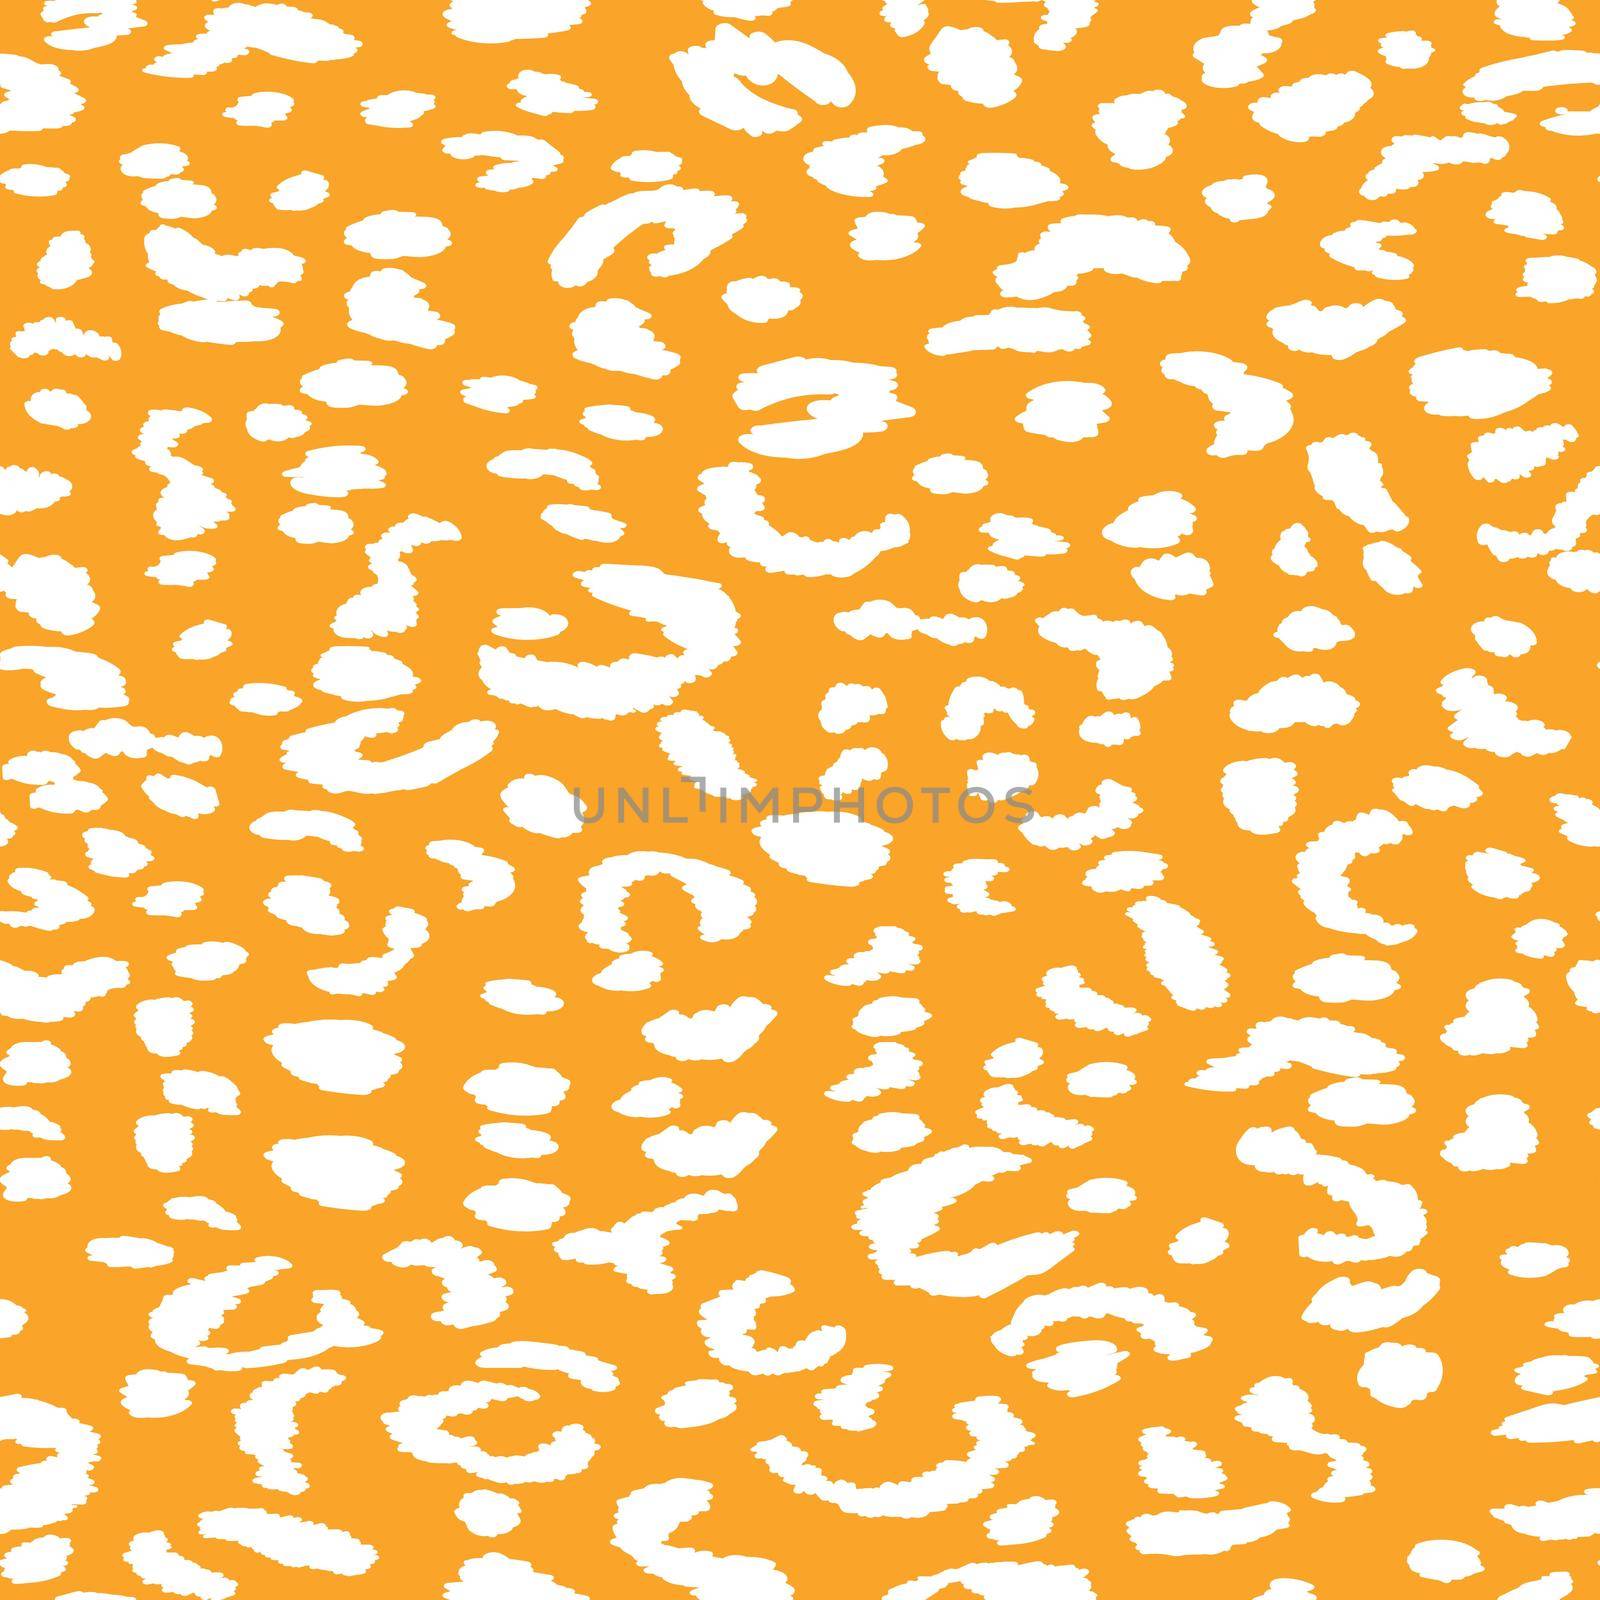 Abstract modern leopard seamless pattern. Animals trendy background. Orange decorative vector stock illustration for print, card, postcard, fabric, textile. Modern ornament of stylized skin by allaku